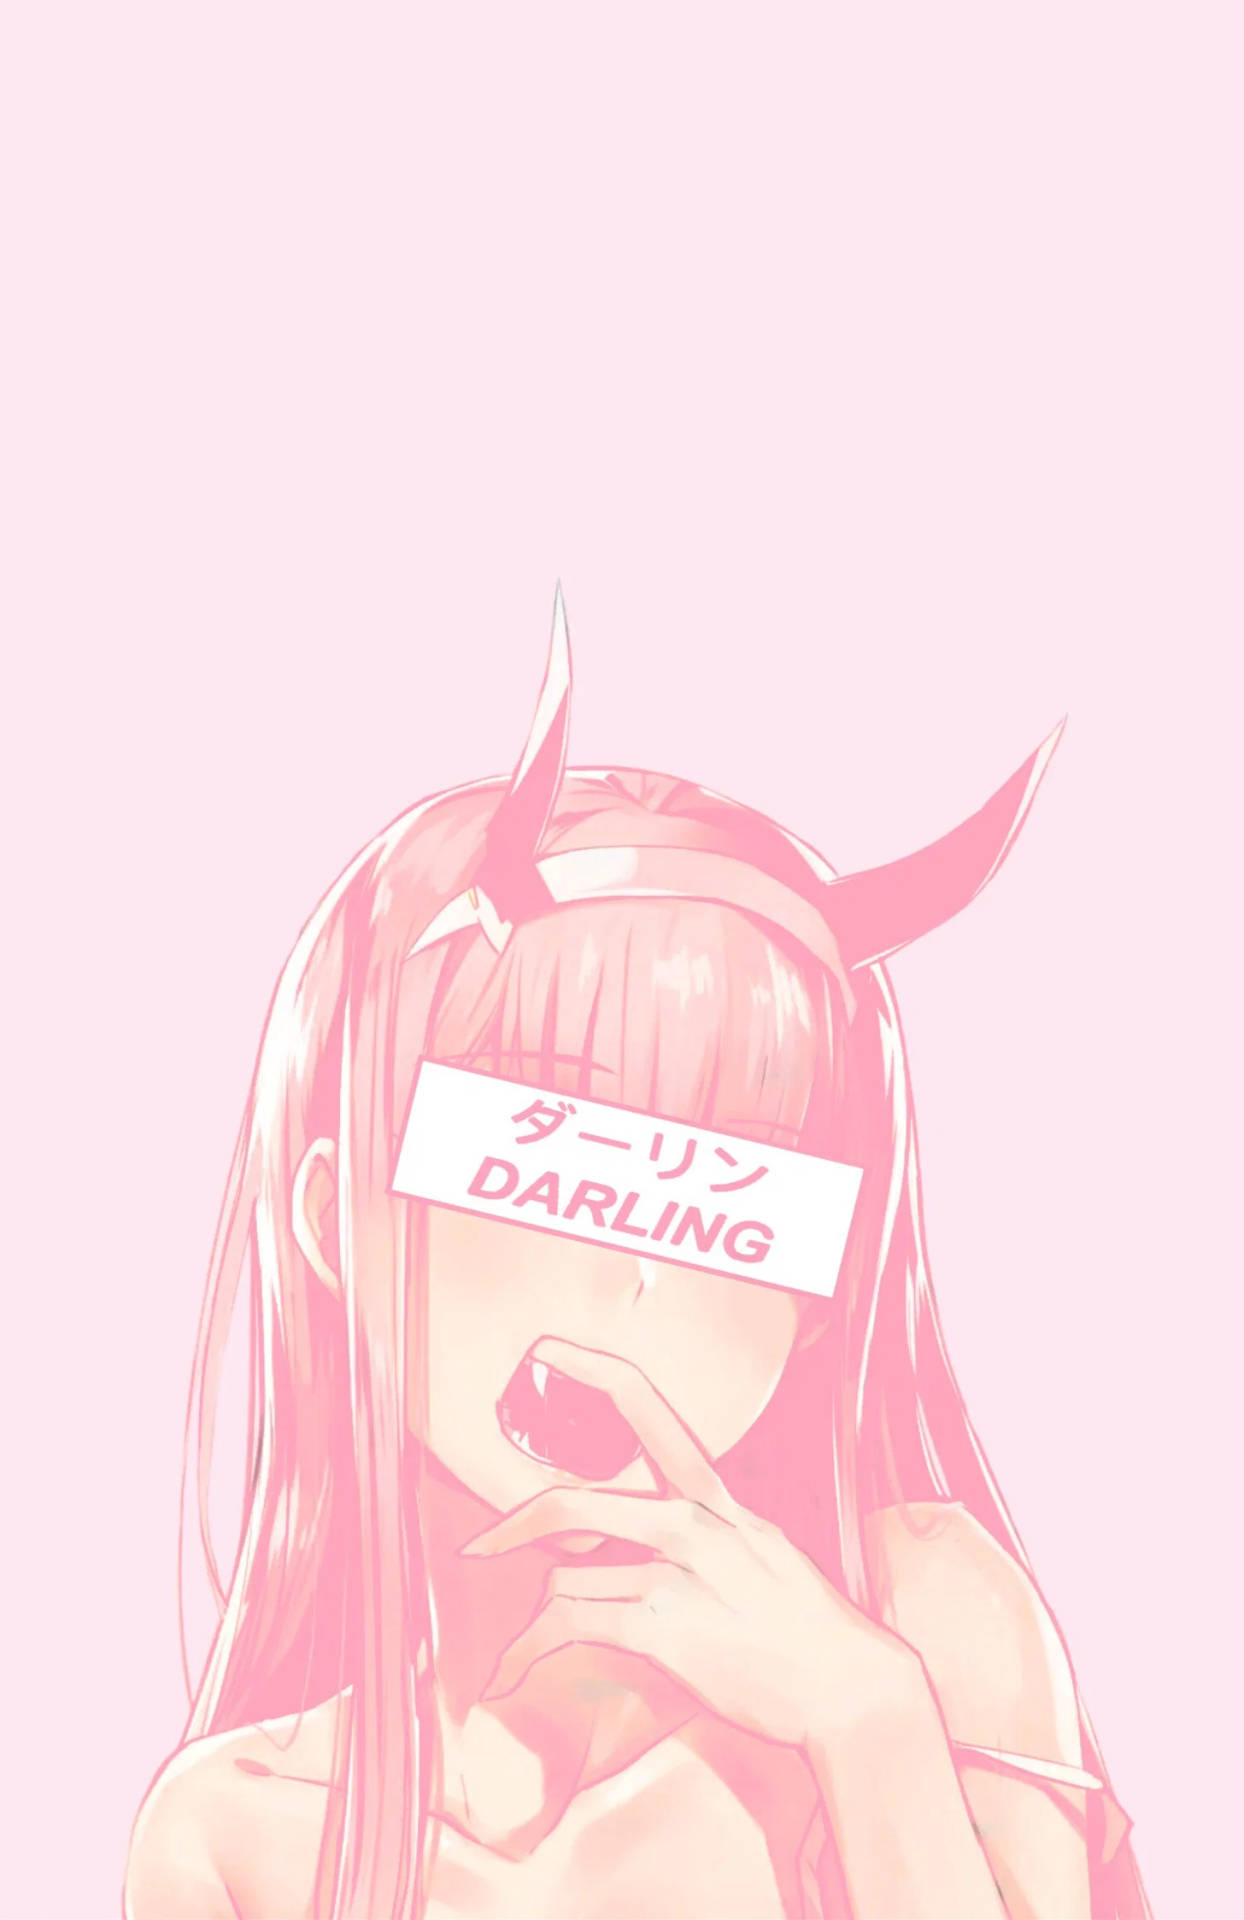 Aesthetic Pink Anime Darling With Horns Wallpaper